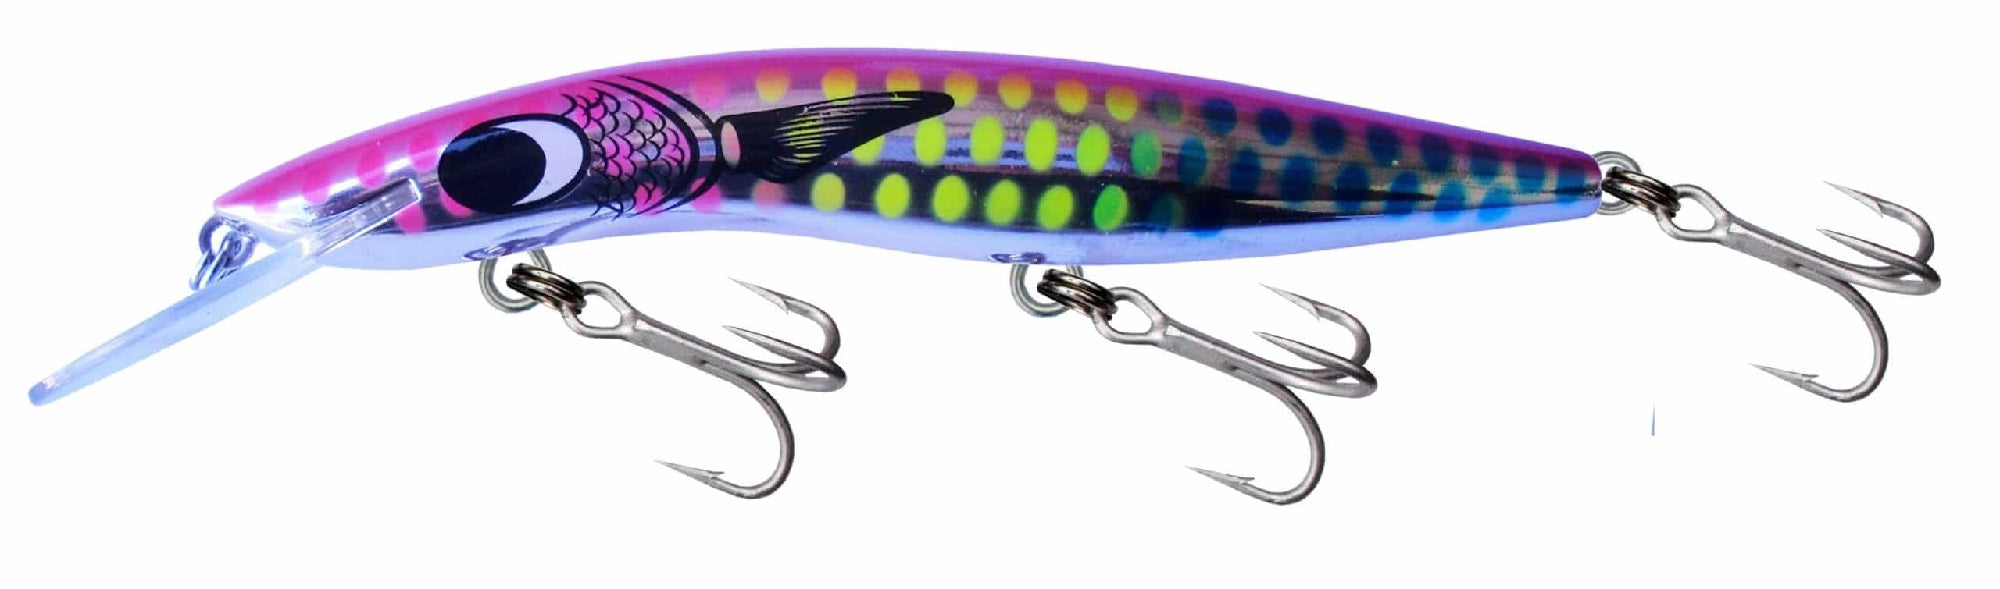 Classic Lures 120 +3ft — Fishing & Outdoor World